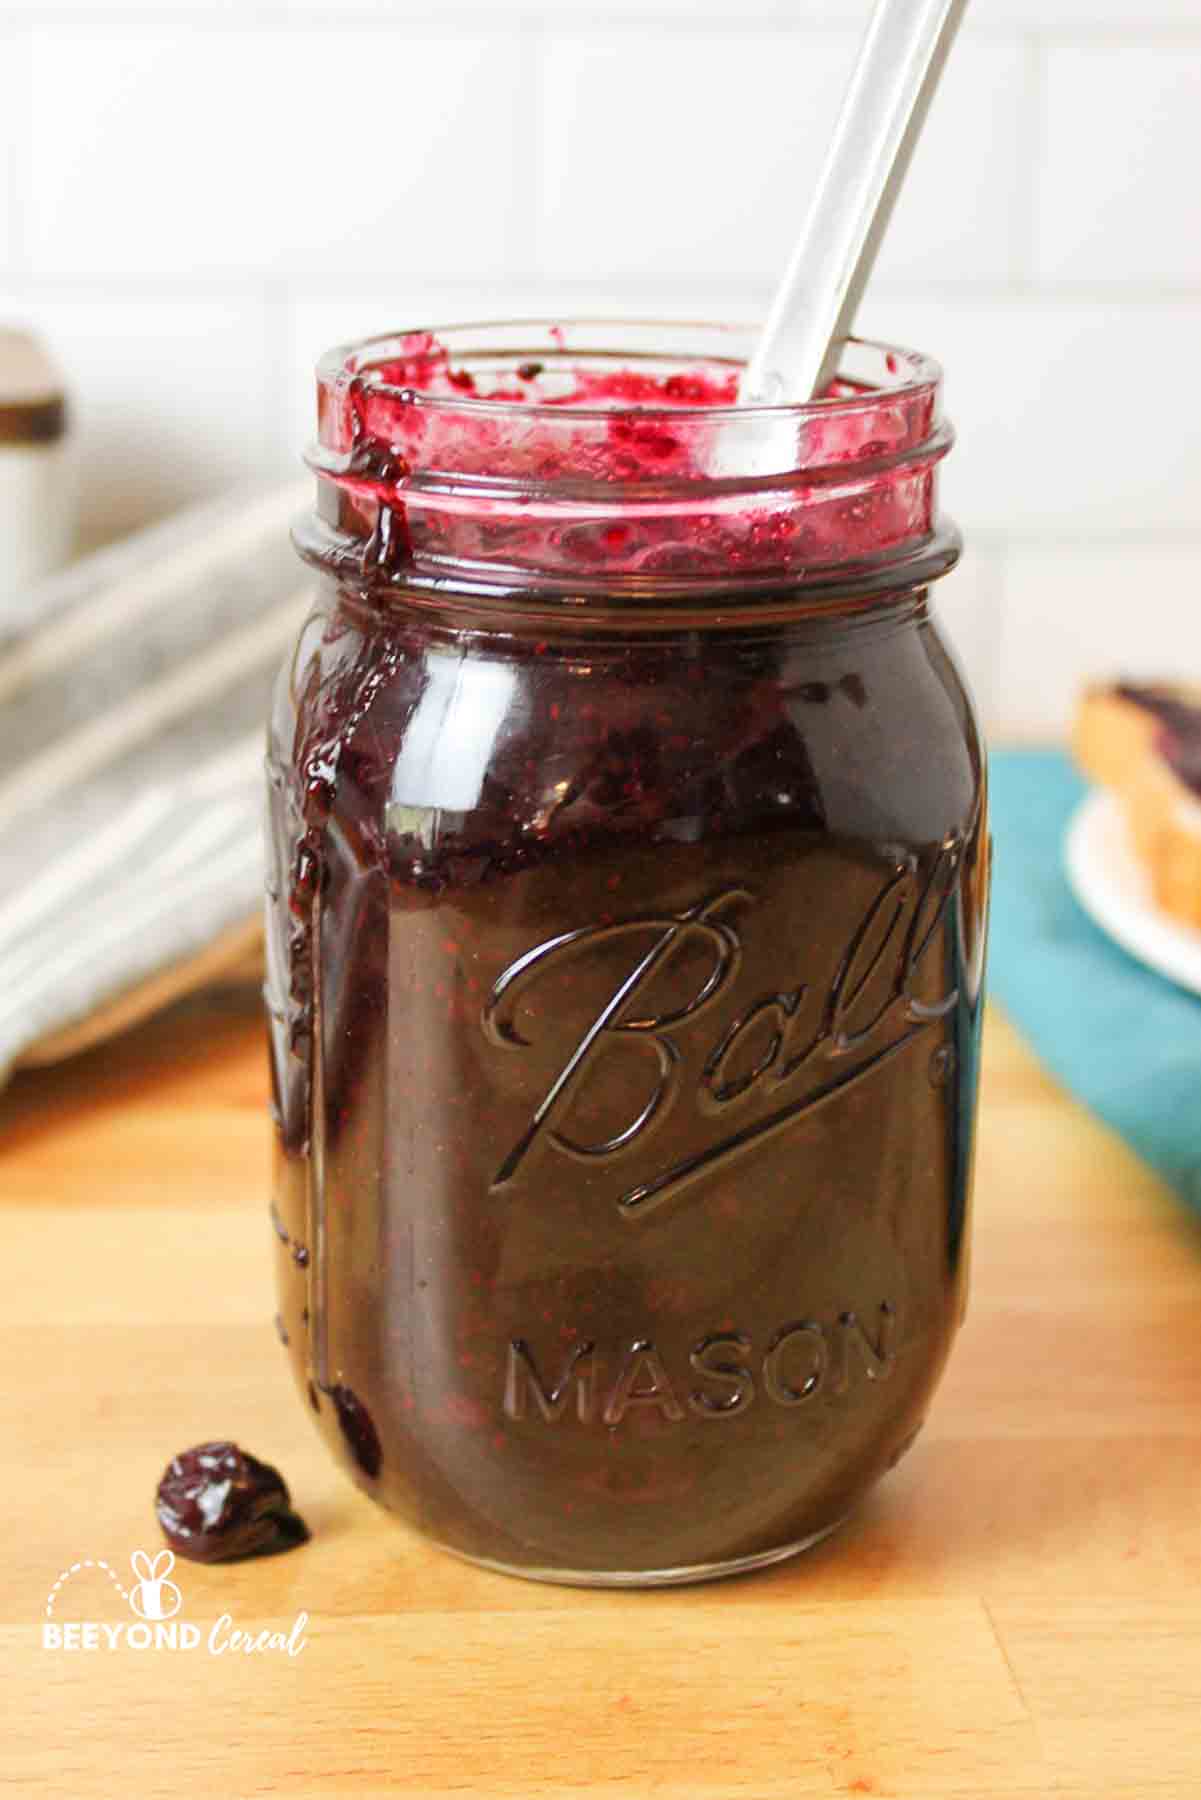 a jar filled with sugar free blueberry jam and a mess of jam running down the side of the jar.